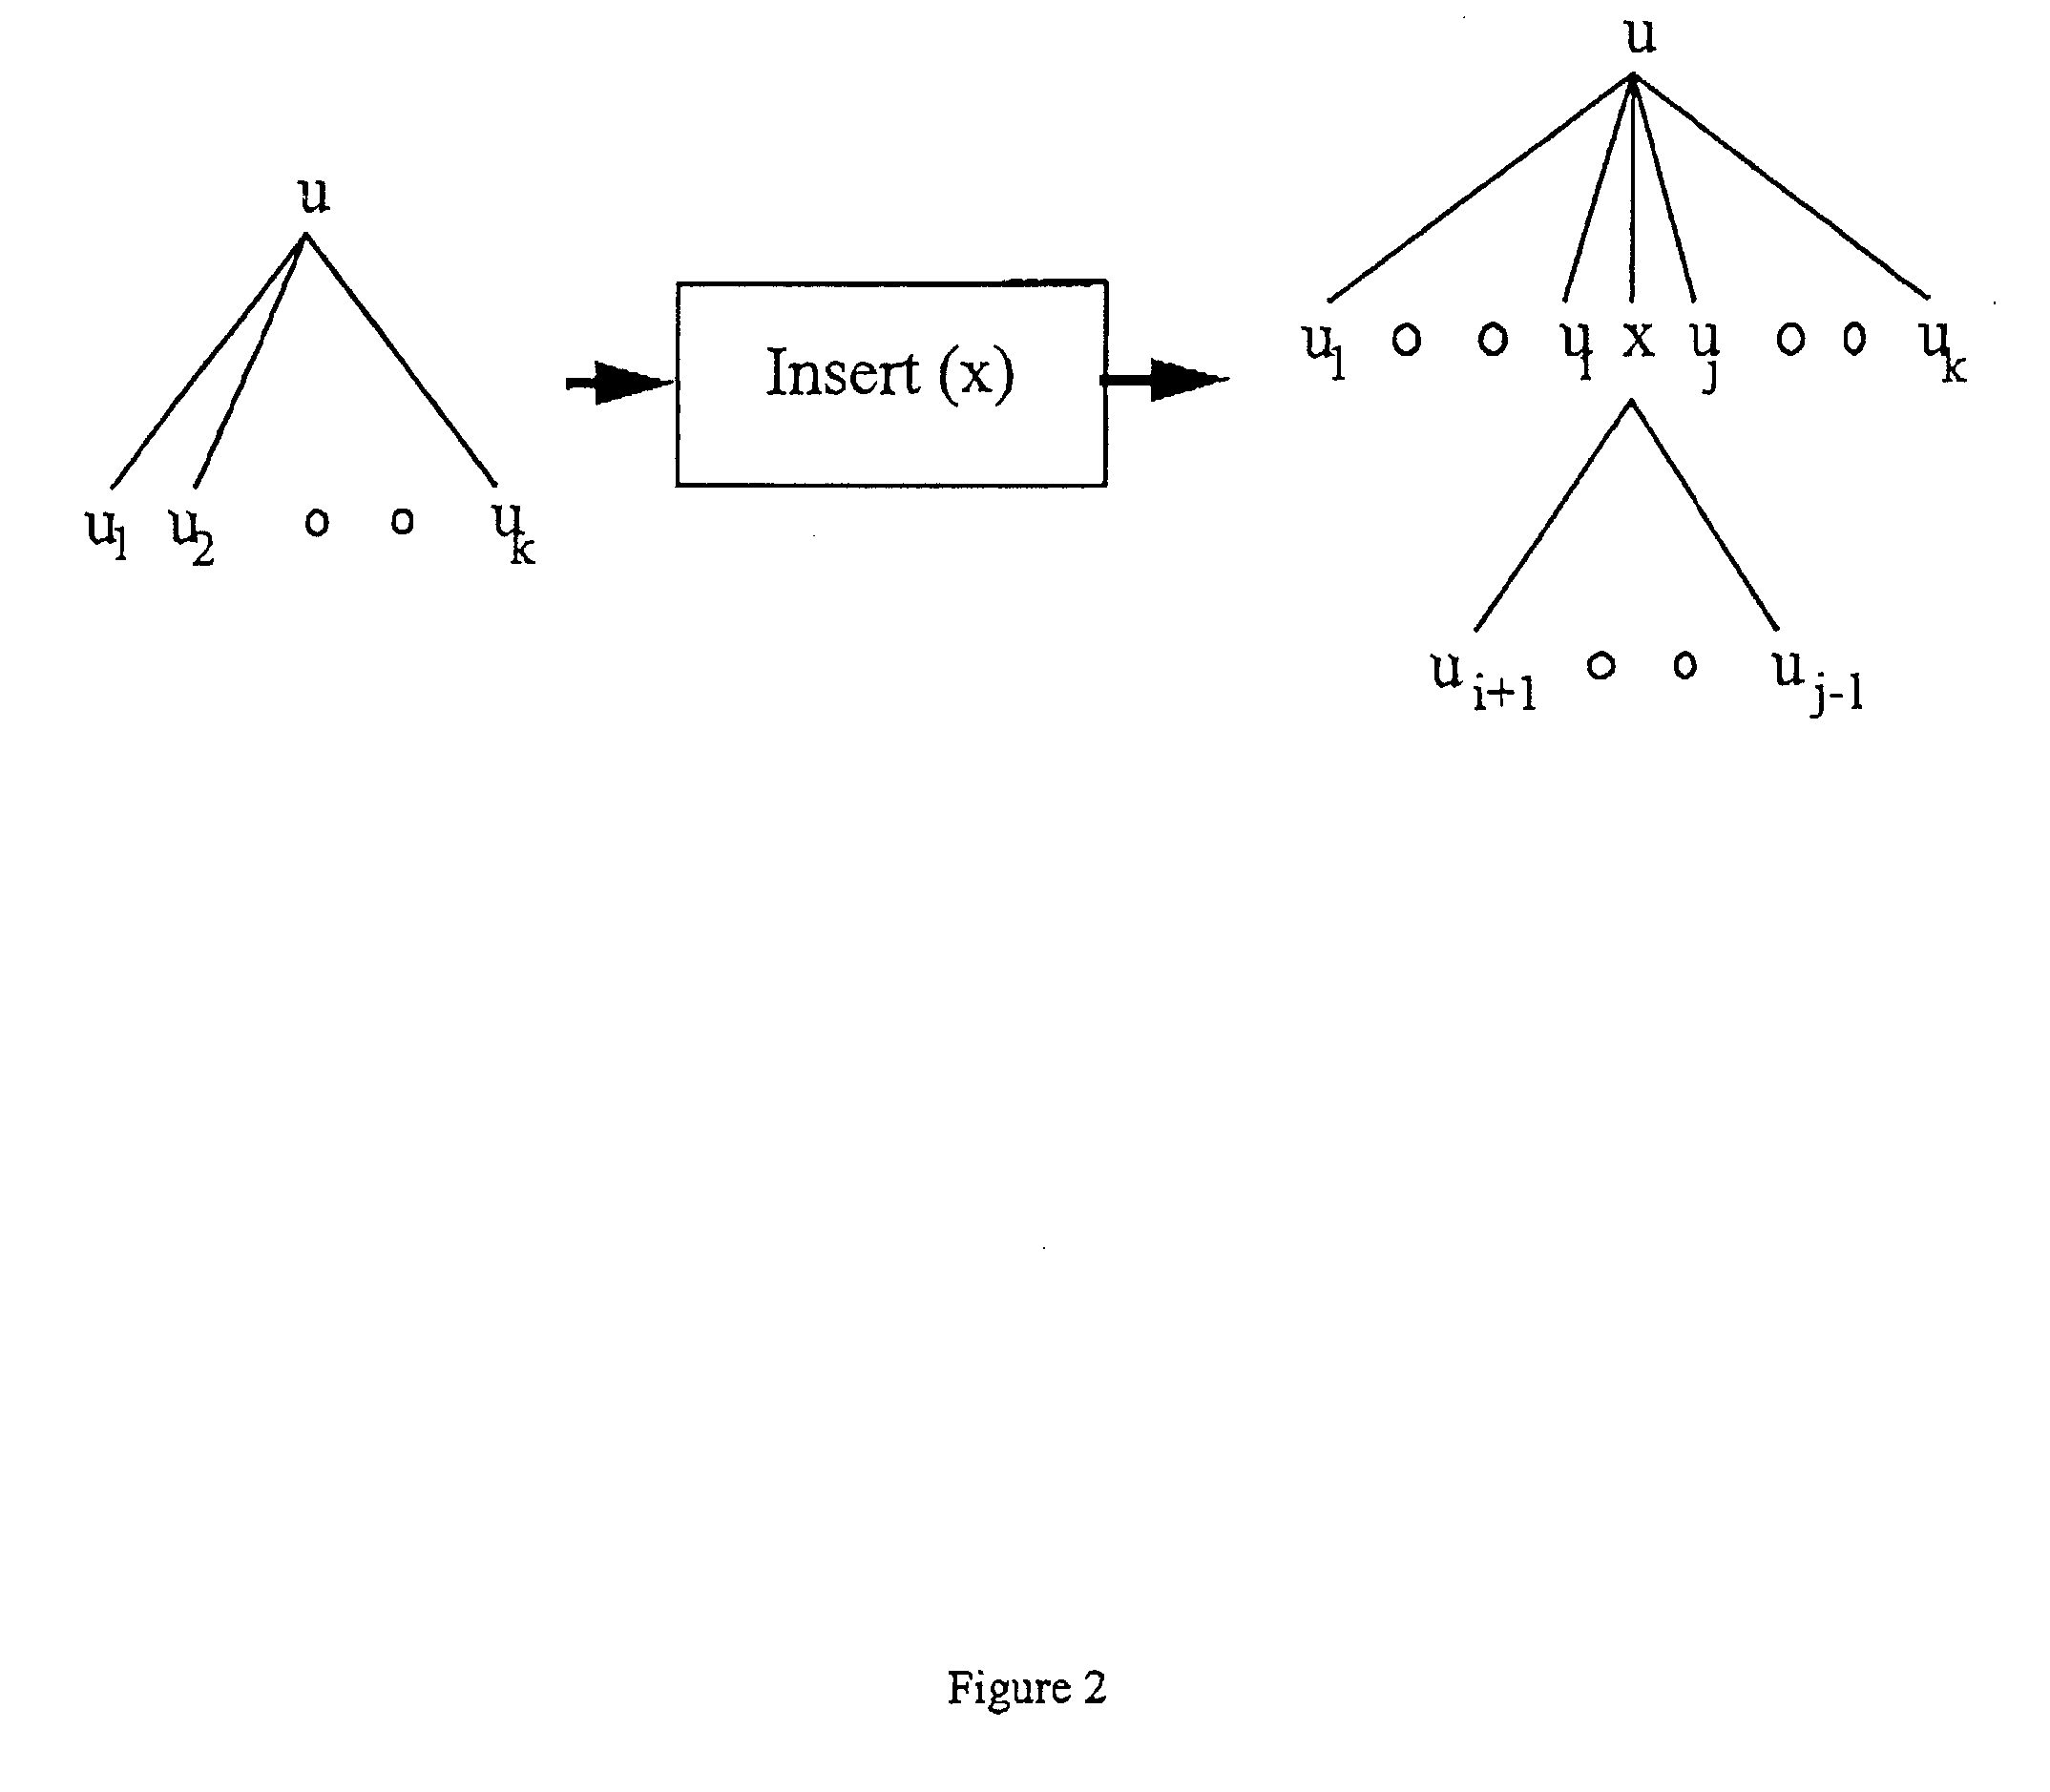 Method for recognizing trees by processing potentially noisy subsequence trees